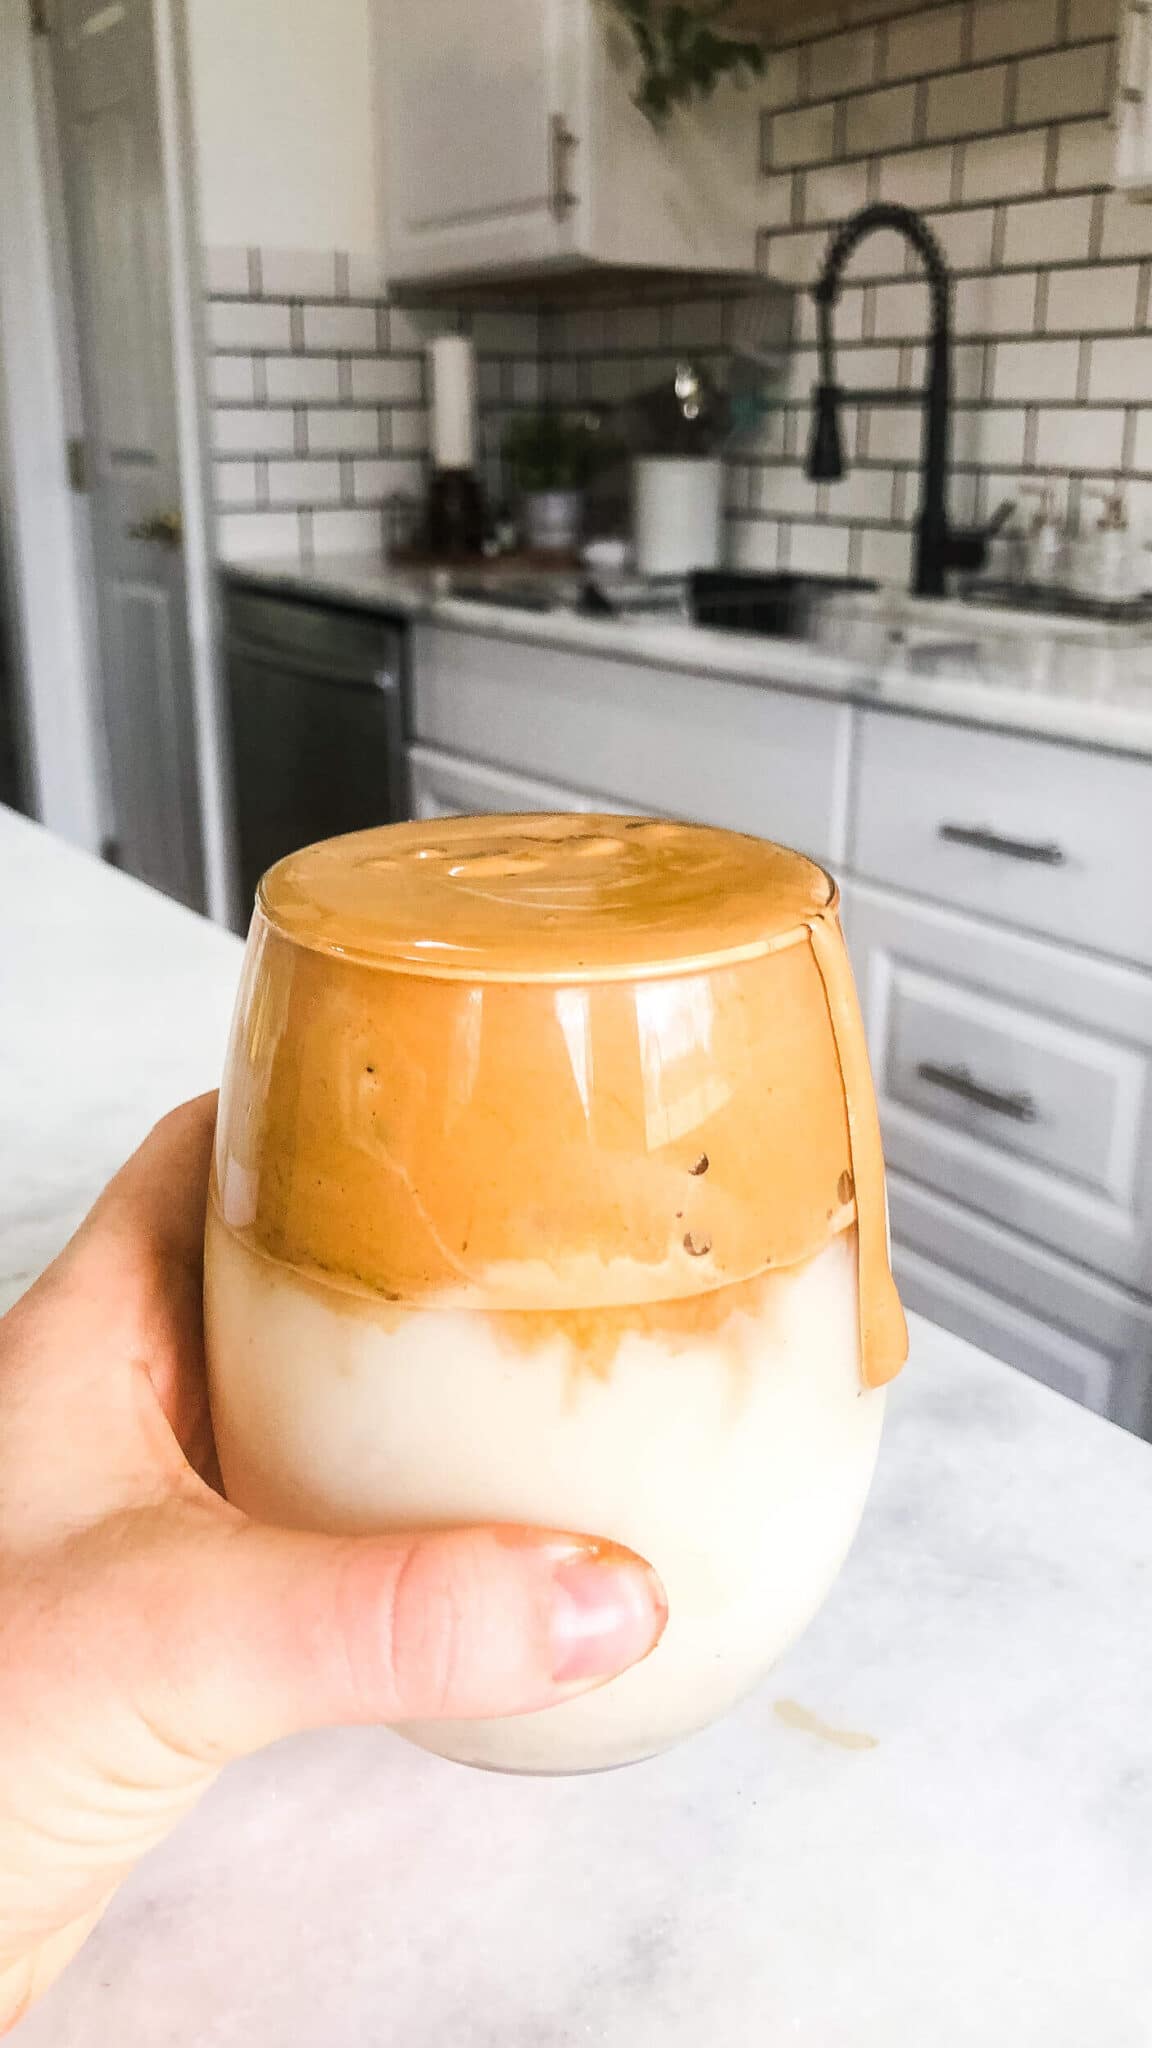 dalgona iced coffee in a glass in a kitchen